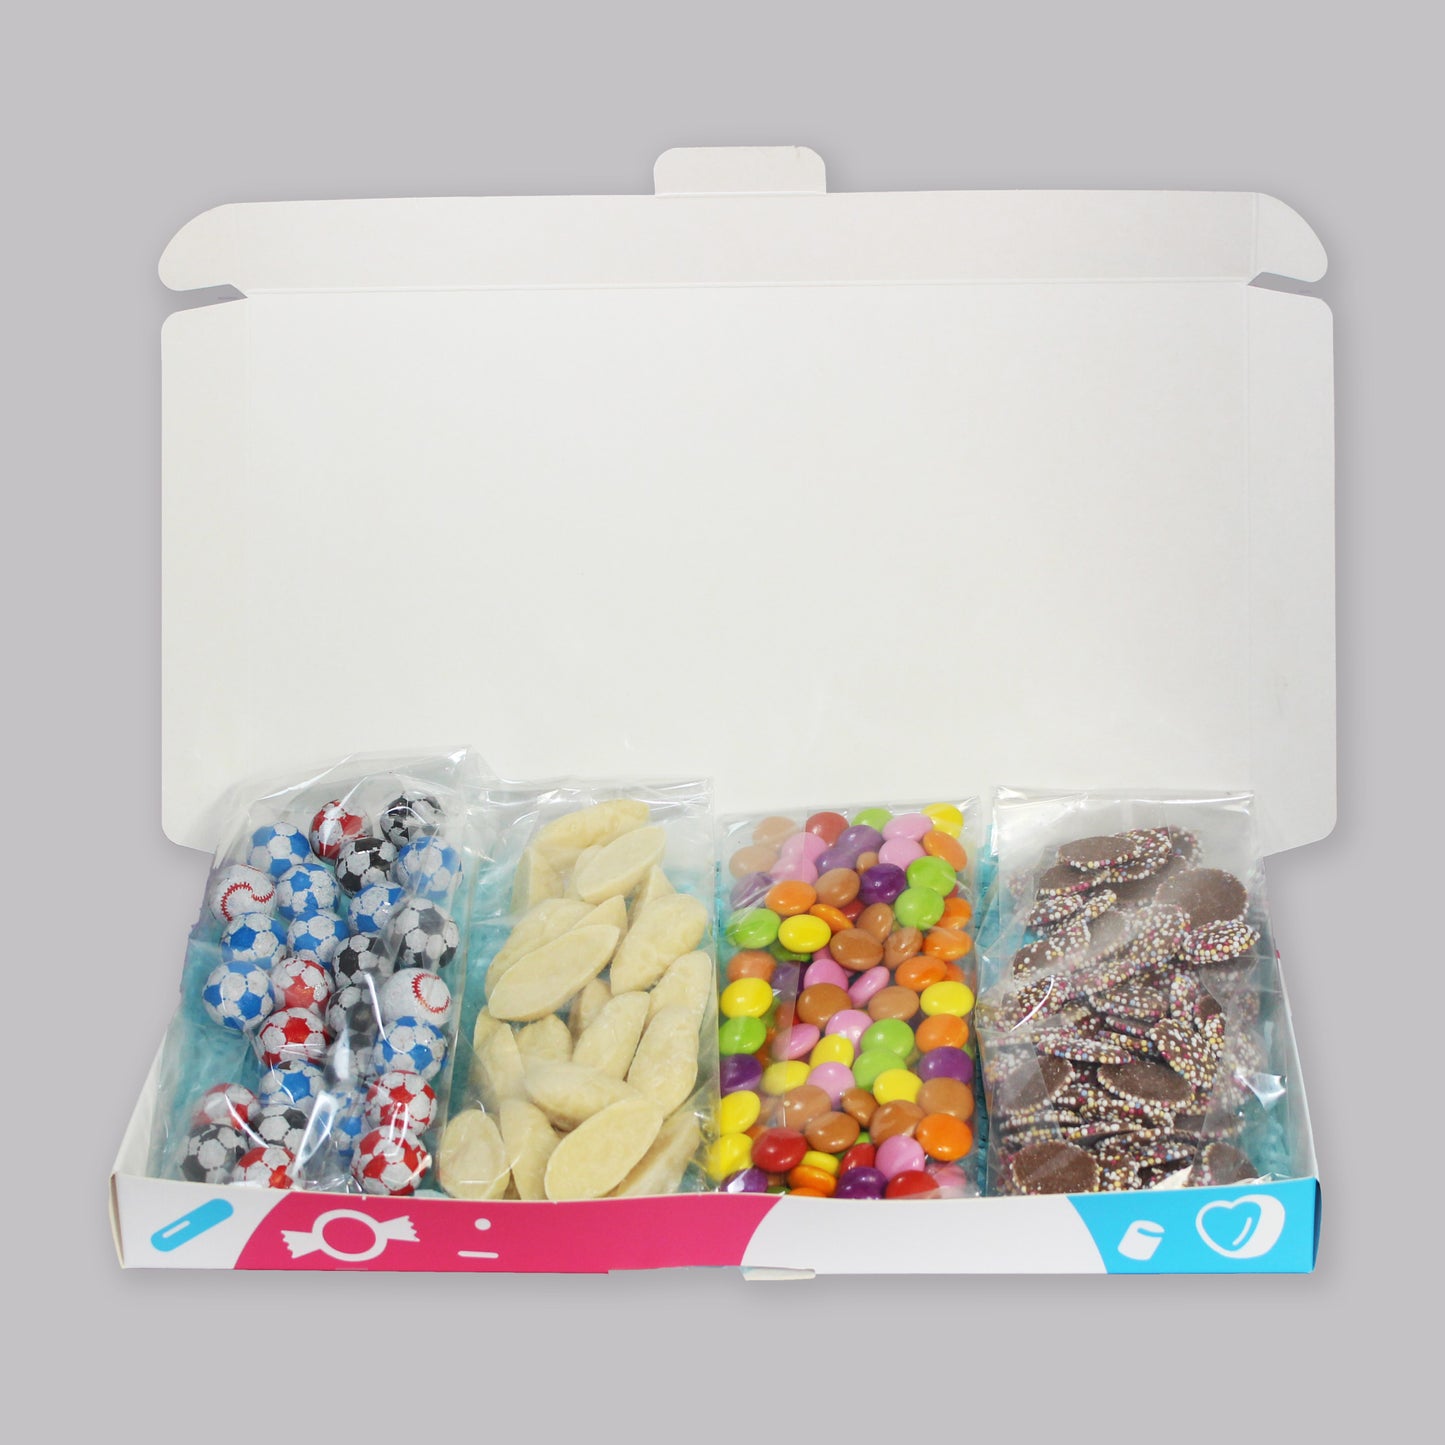 Gift Sweets - Chocolate Flavour Novelties - 125g Chocolate Footballs, 125g White Mice, 125g Chocolate beans, 125g Jazzles